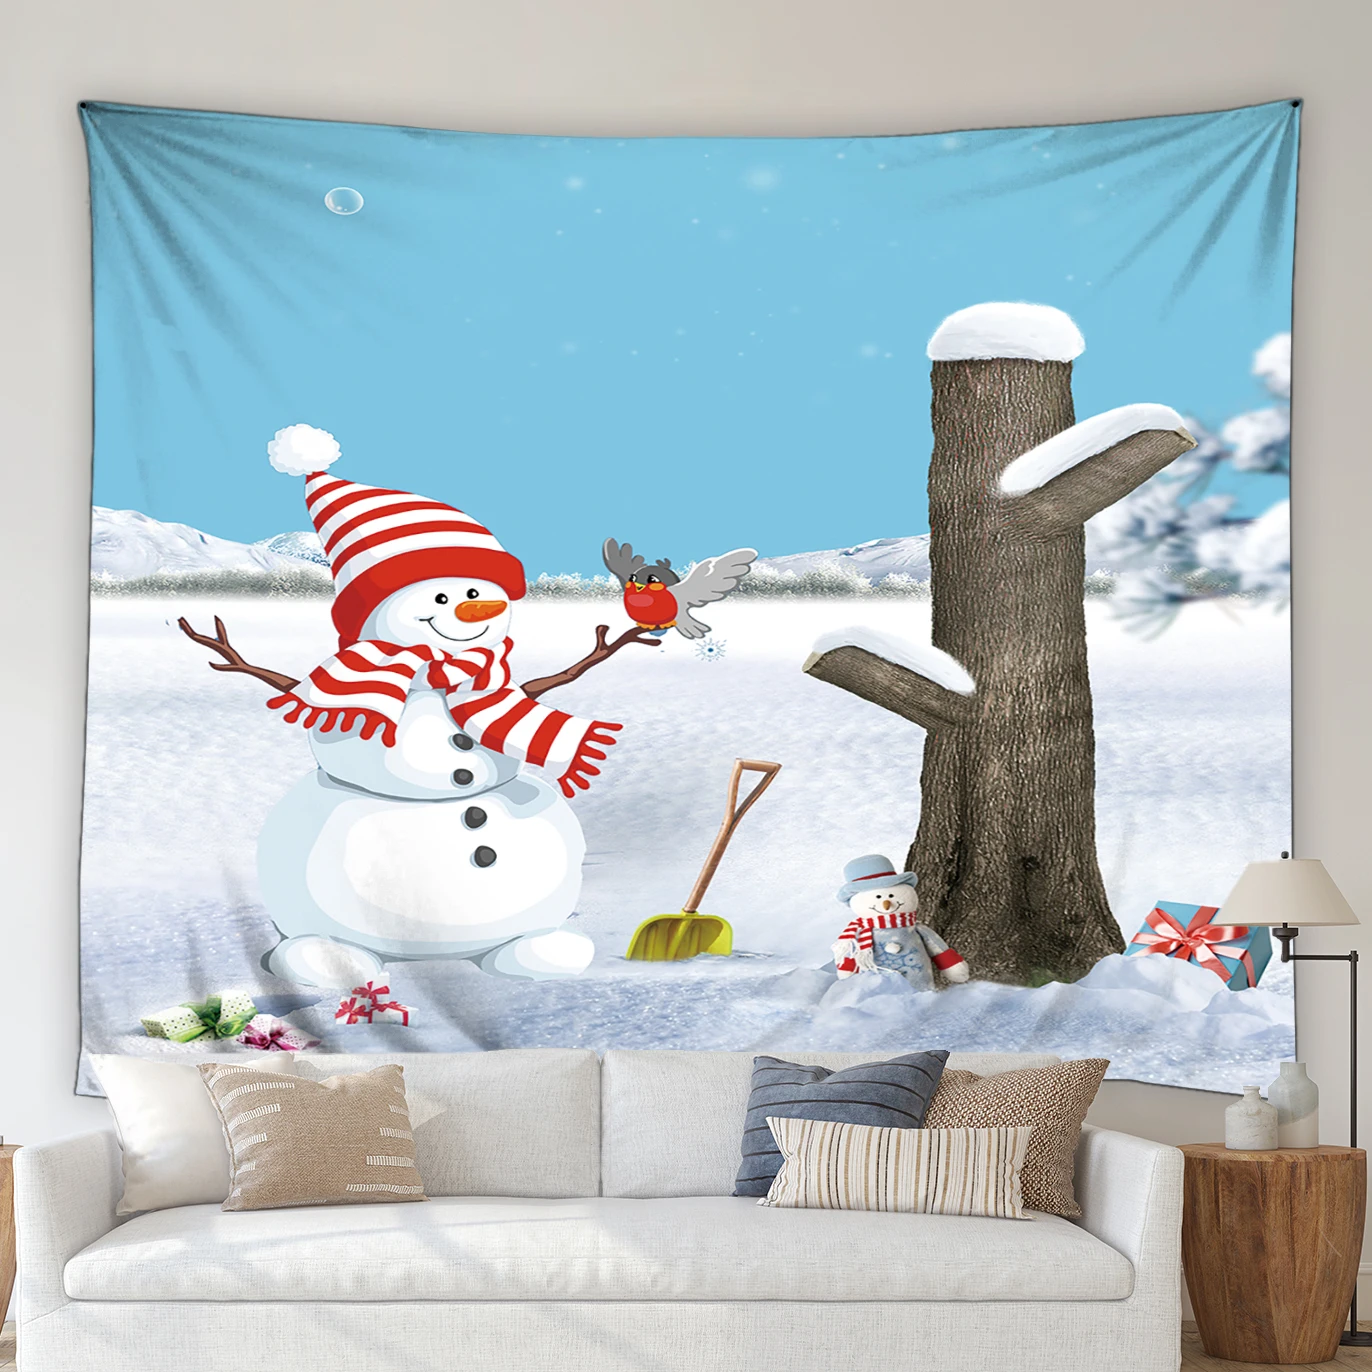 

Christmas Hippie Big Tapestry Cute Cartoon Snowman Winter Landscape White Snowy Christmas Party Decoration Wall Hanging Blankets